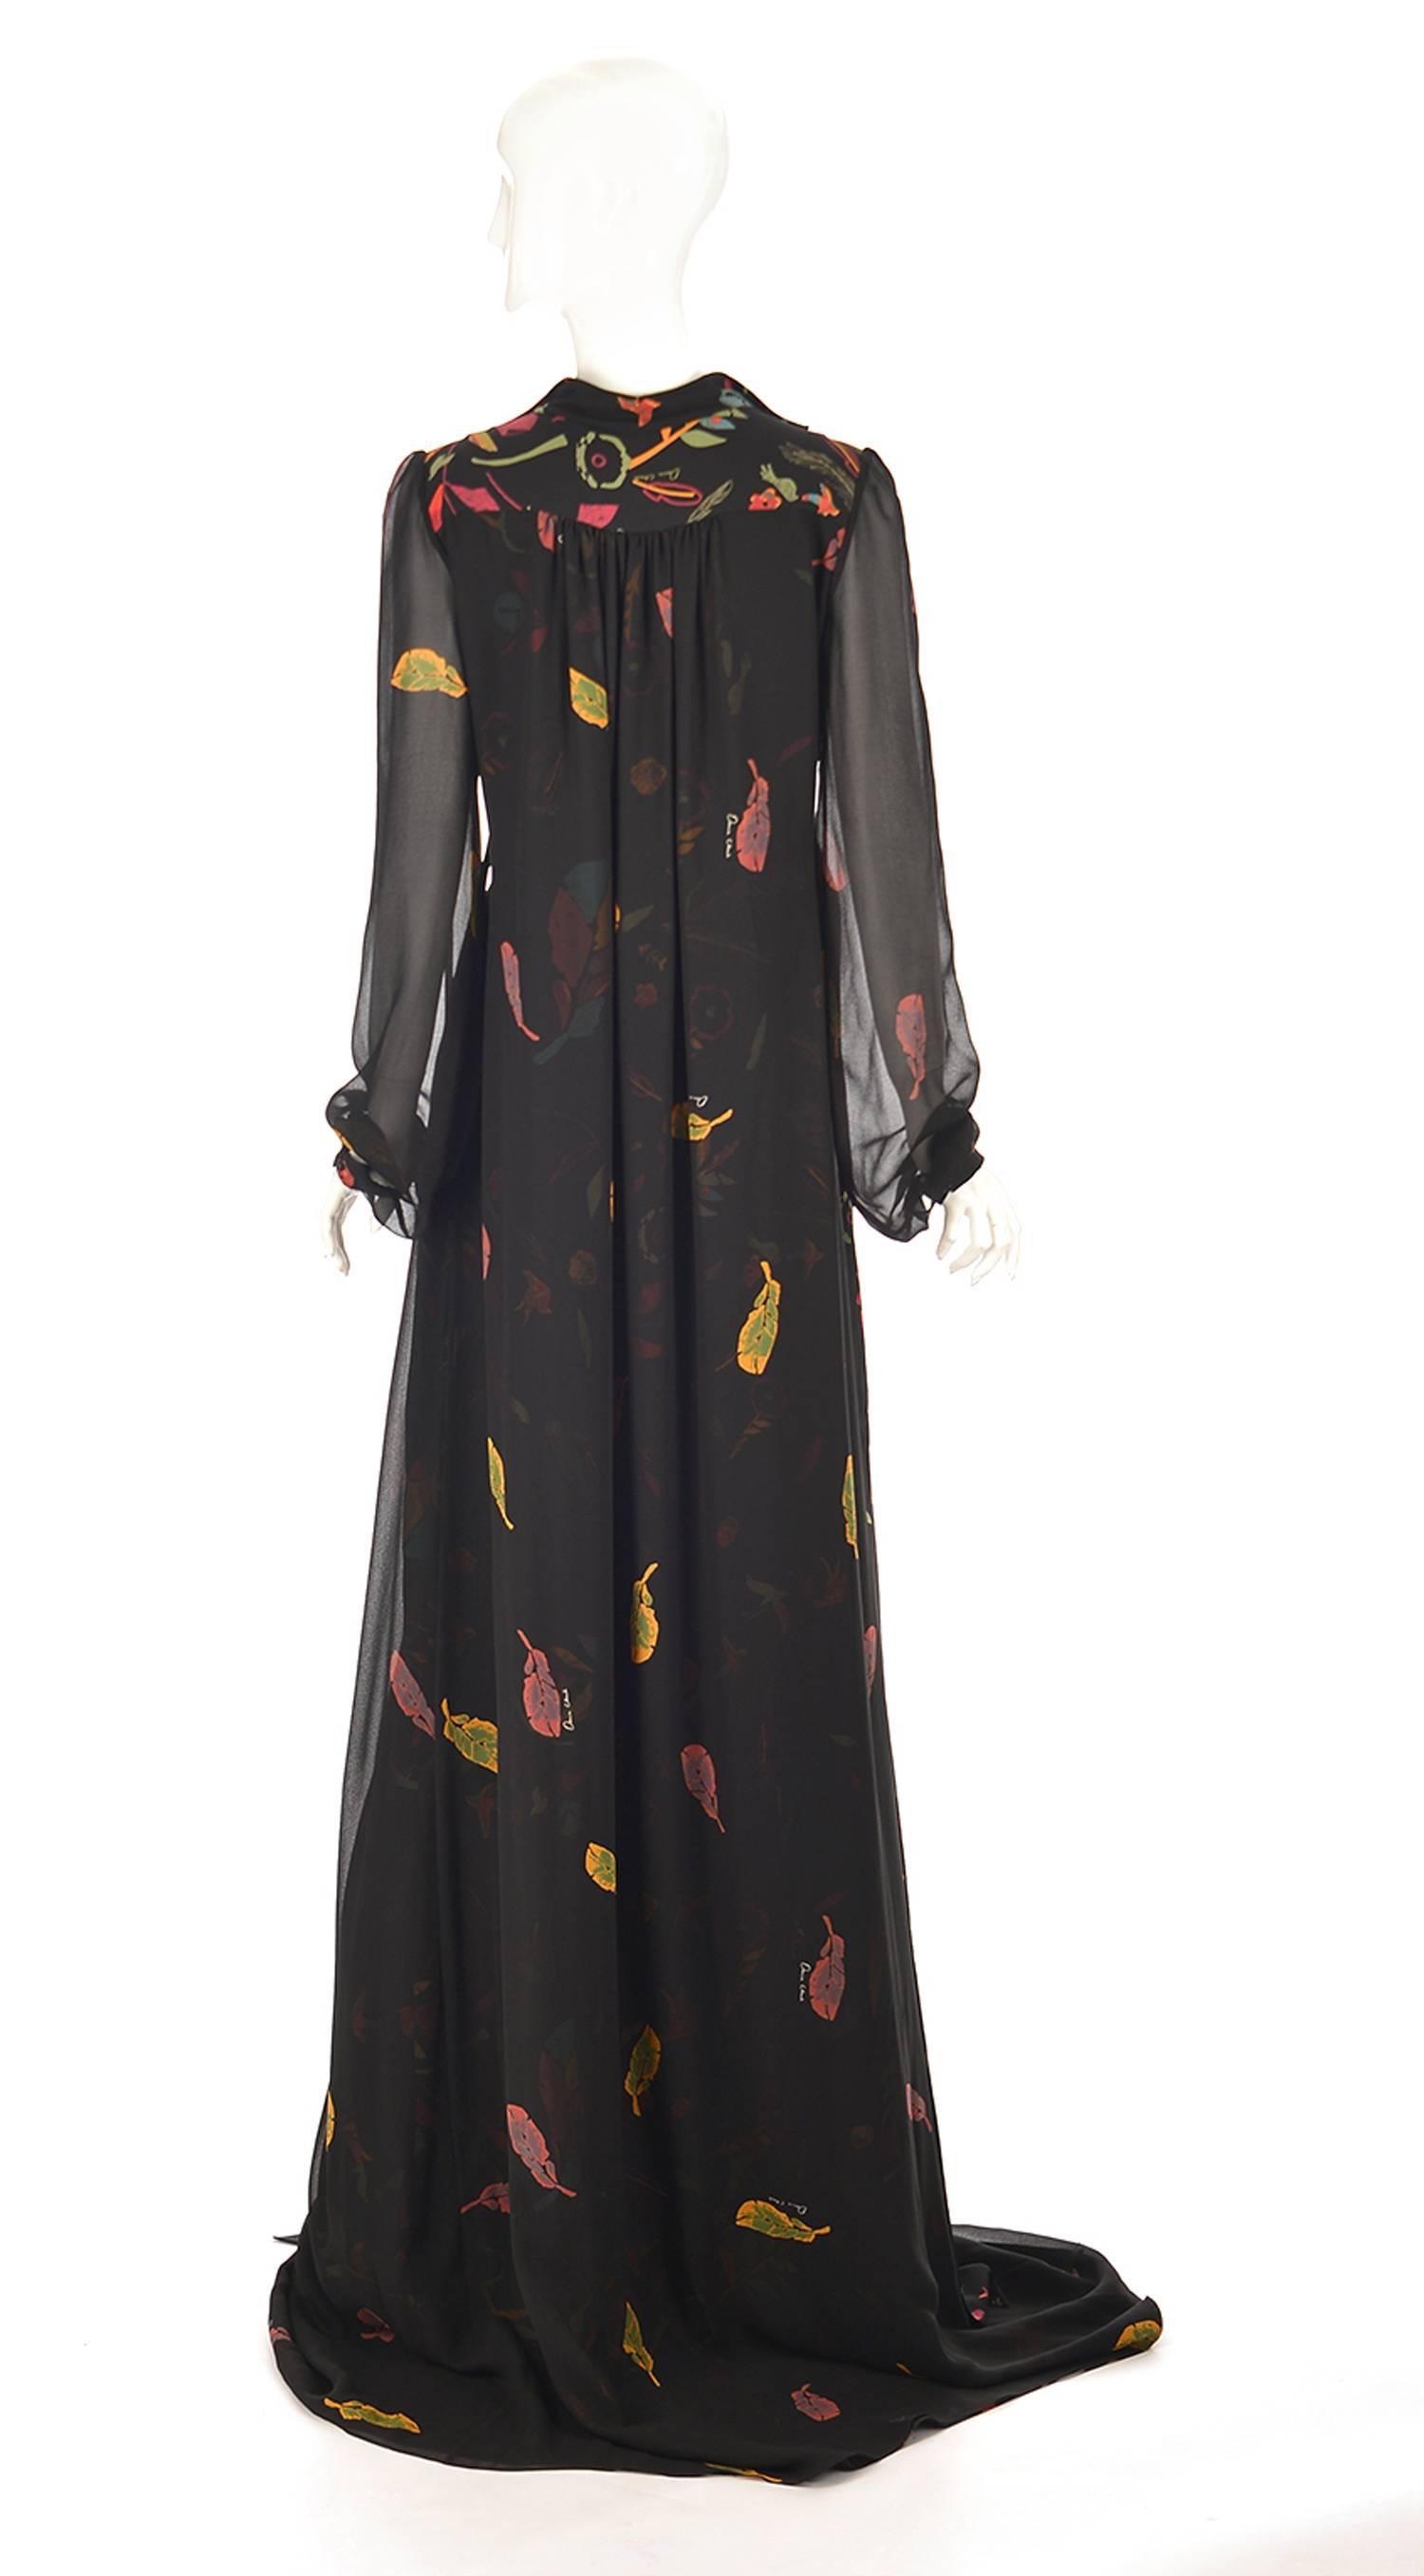  Ossie Clark Black Silk Empire Feather Print Gown, 2008 In New Condition For Sale In Houston, TX